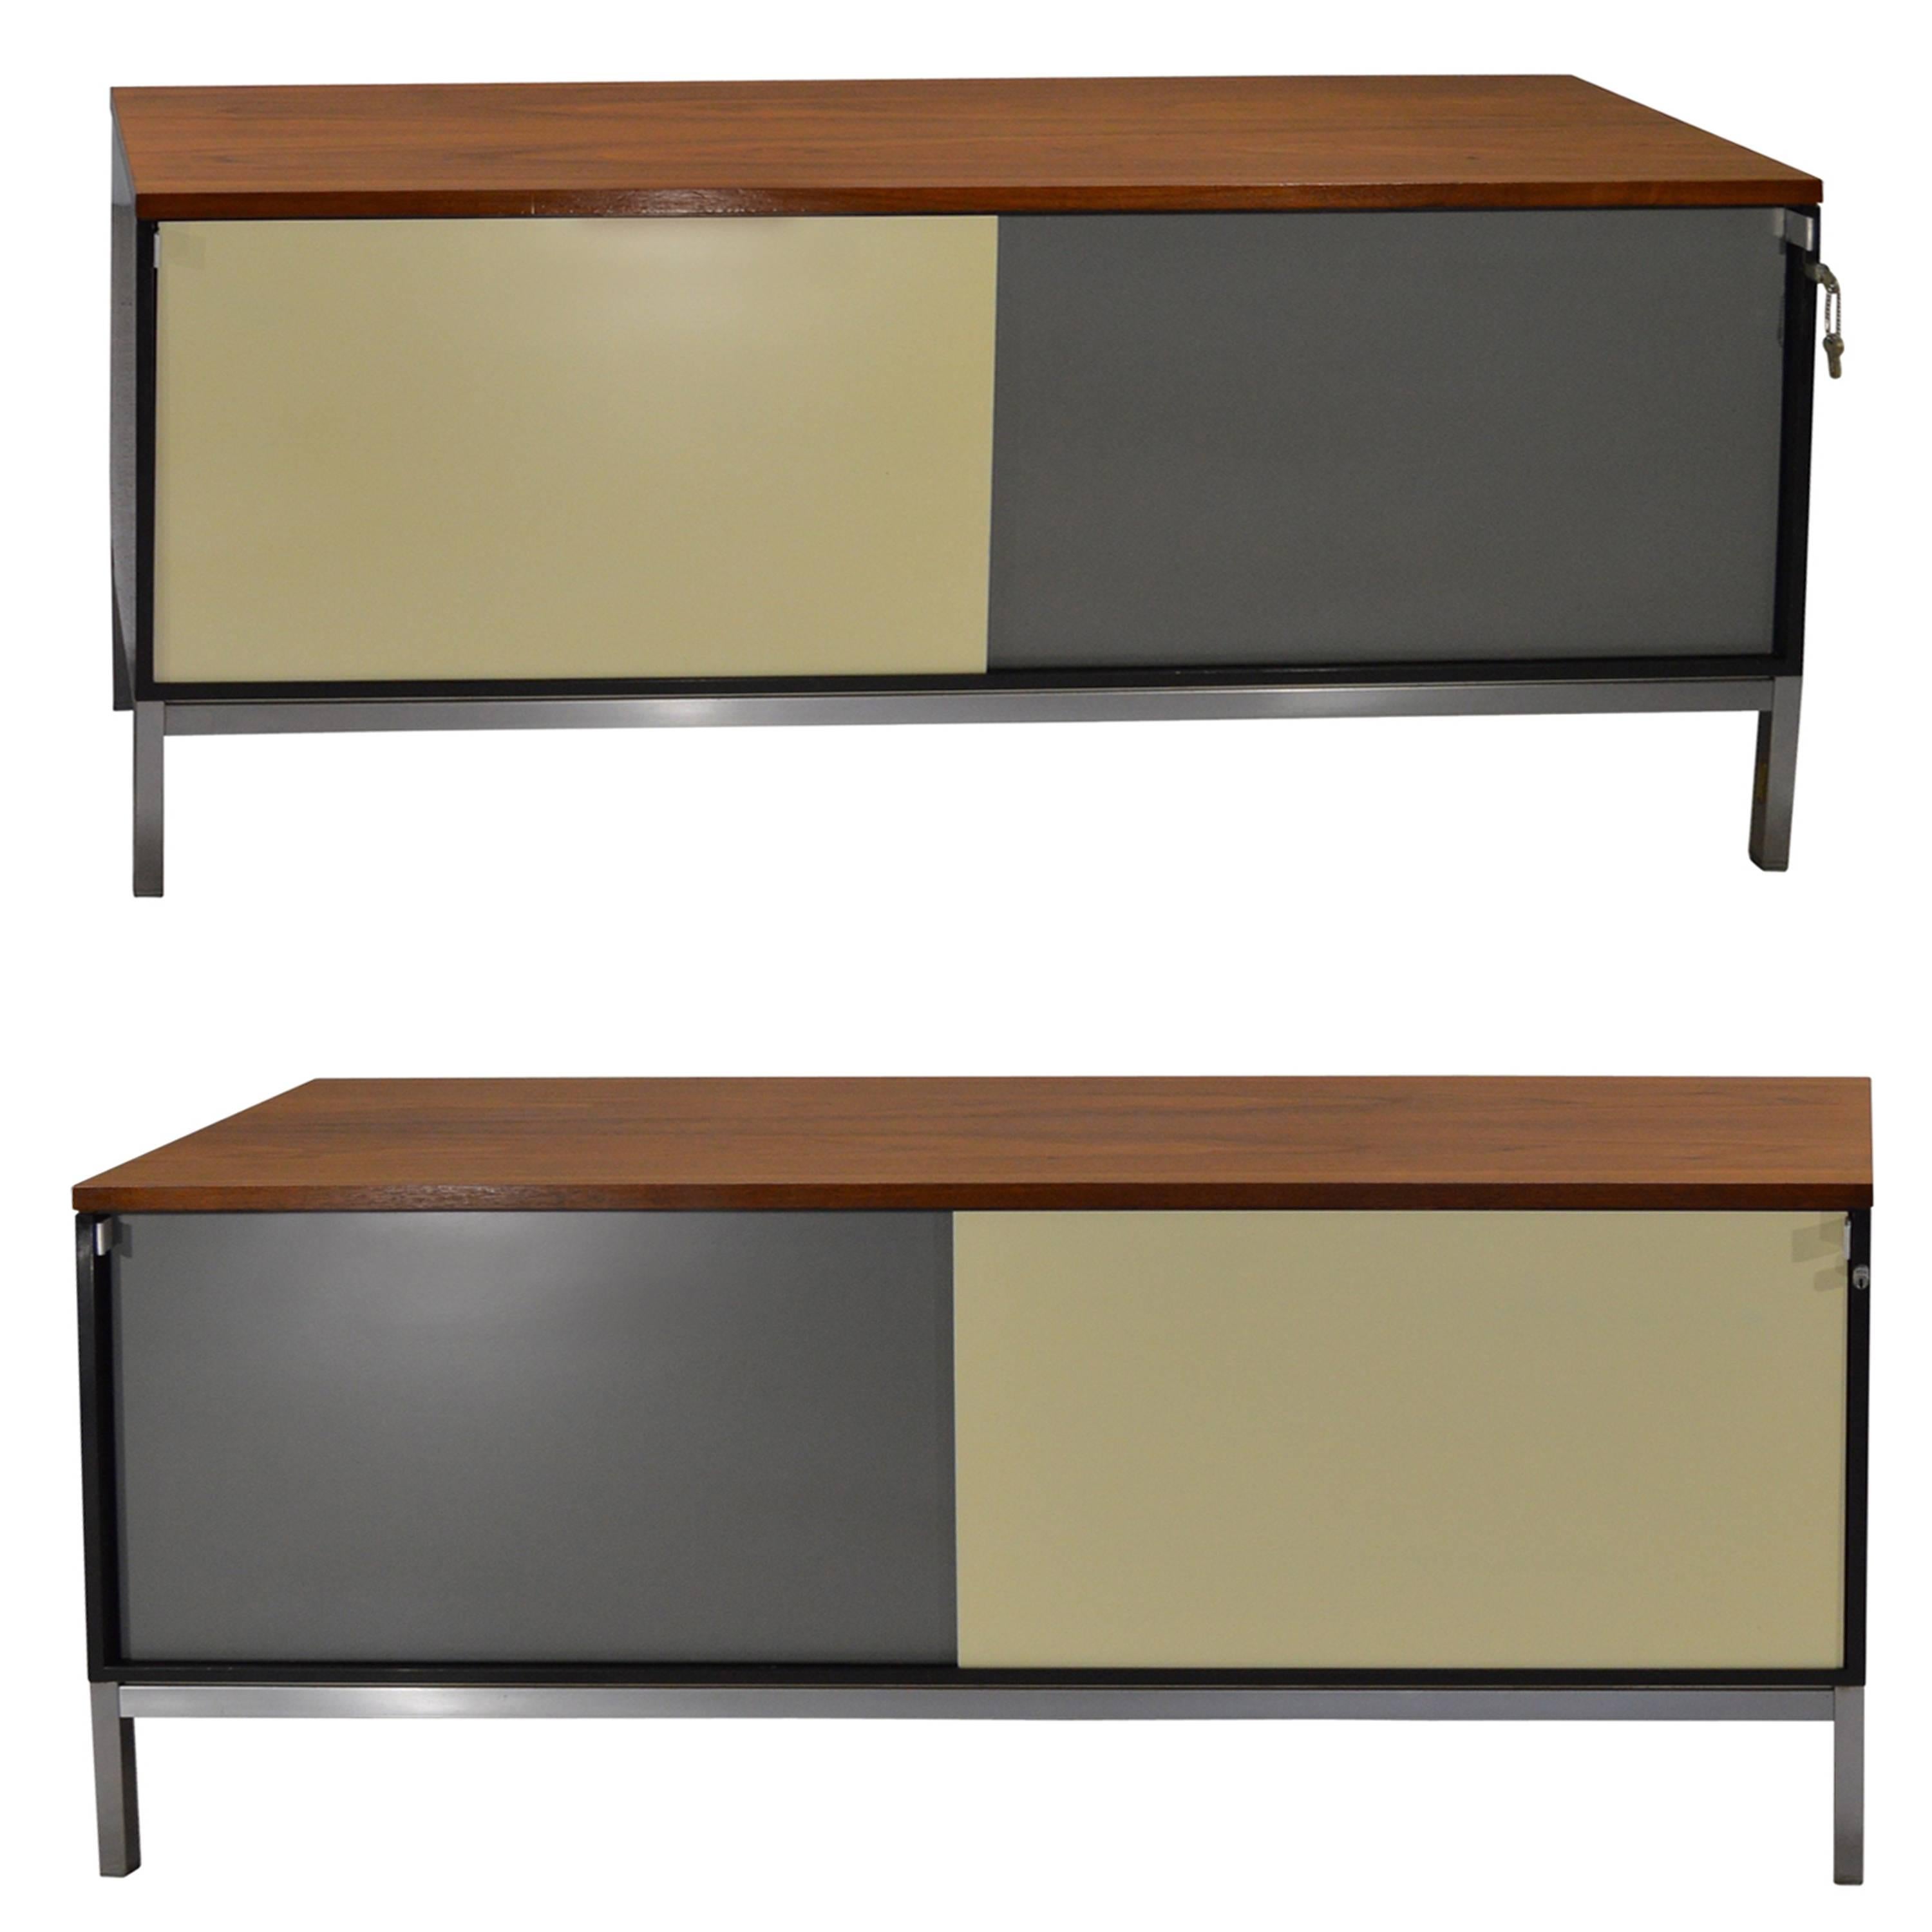 Stunning Pair of Mid-Century Retro Office Cabinets by Art Metal for Knoll Int.